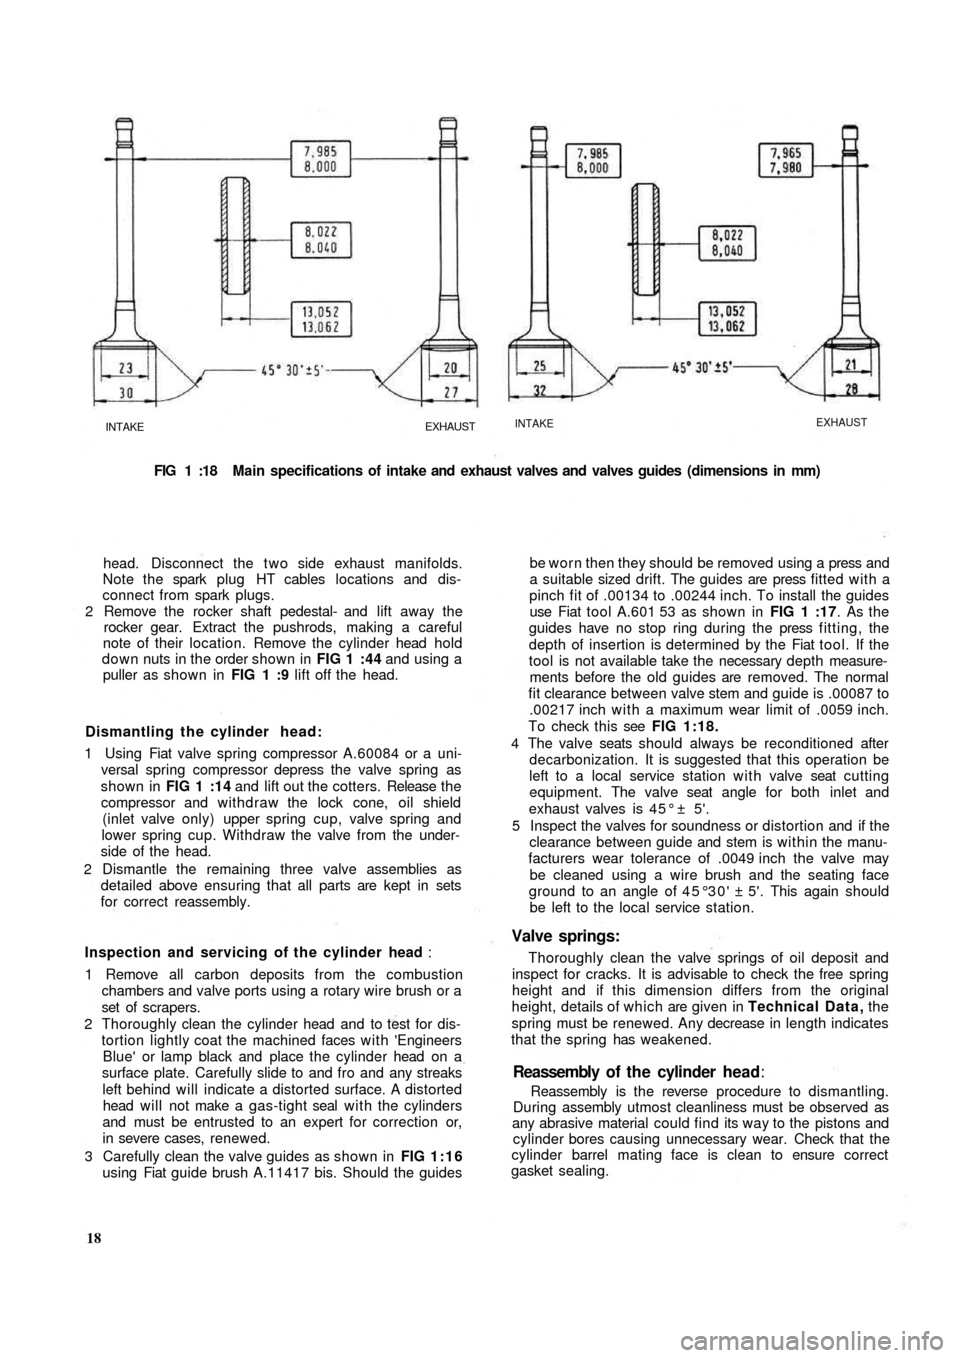 FIAT 500 1968 1.G Workshop Manual INTAKEEXHAUSTINTAKEEXHAUST
FIG 1 :18  Main specifications of intake and exhaust valves and valves guides (dimensions in  mm)
head. Disconnect the t w o side exhaust manifolds.
Note the spark  plug  HT